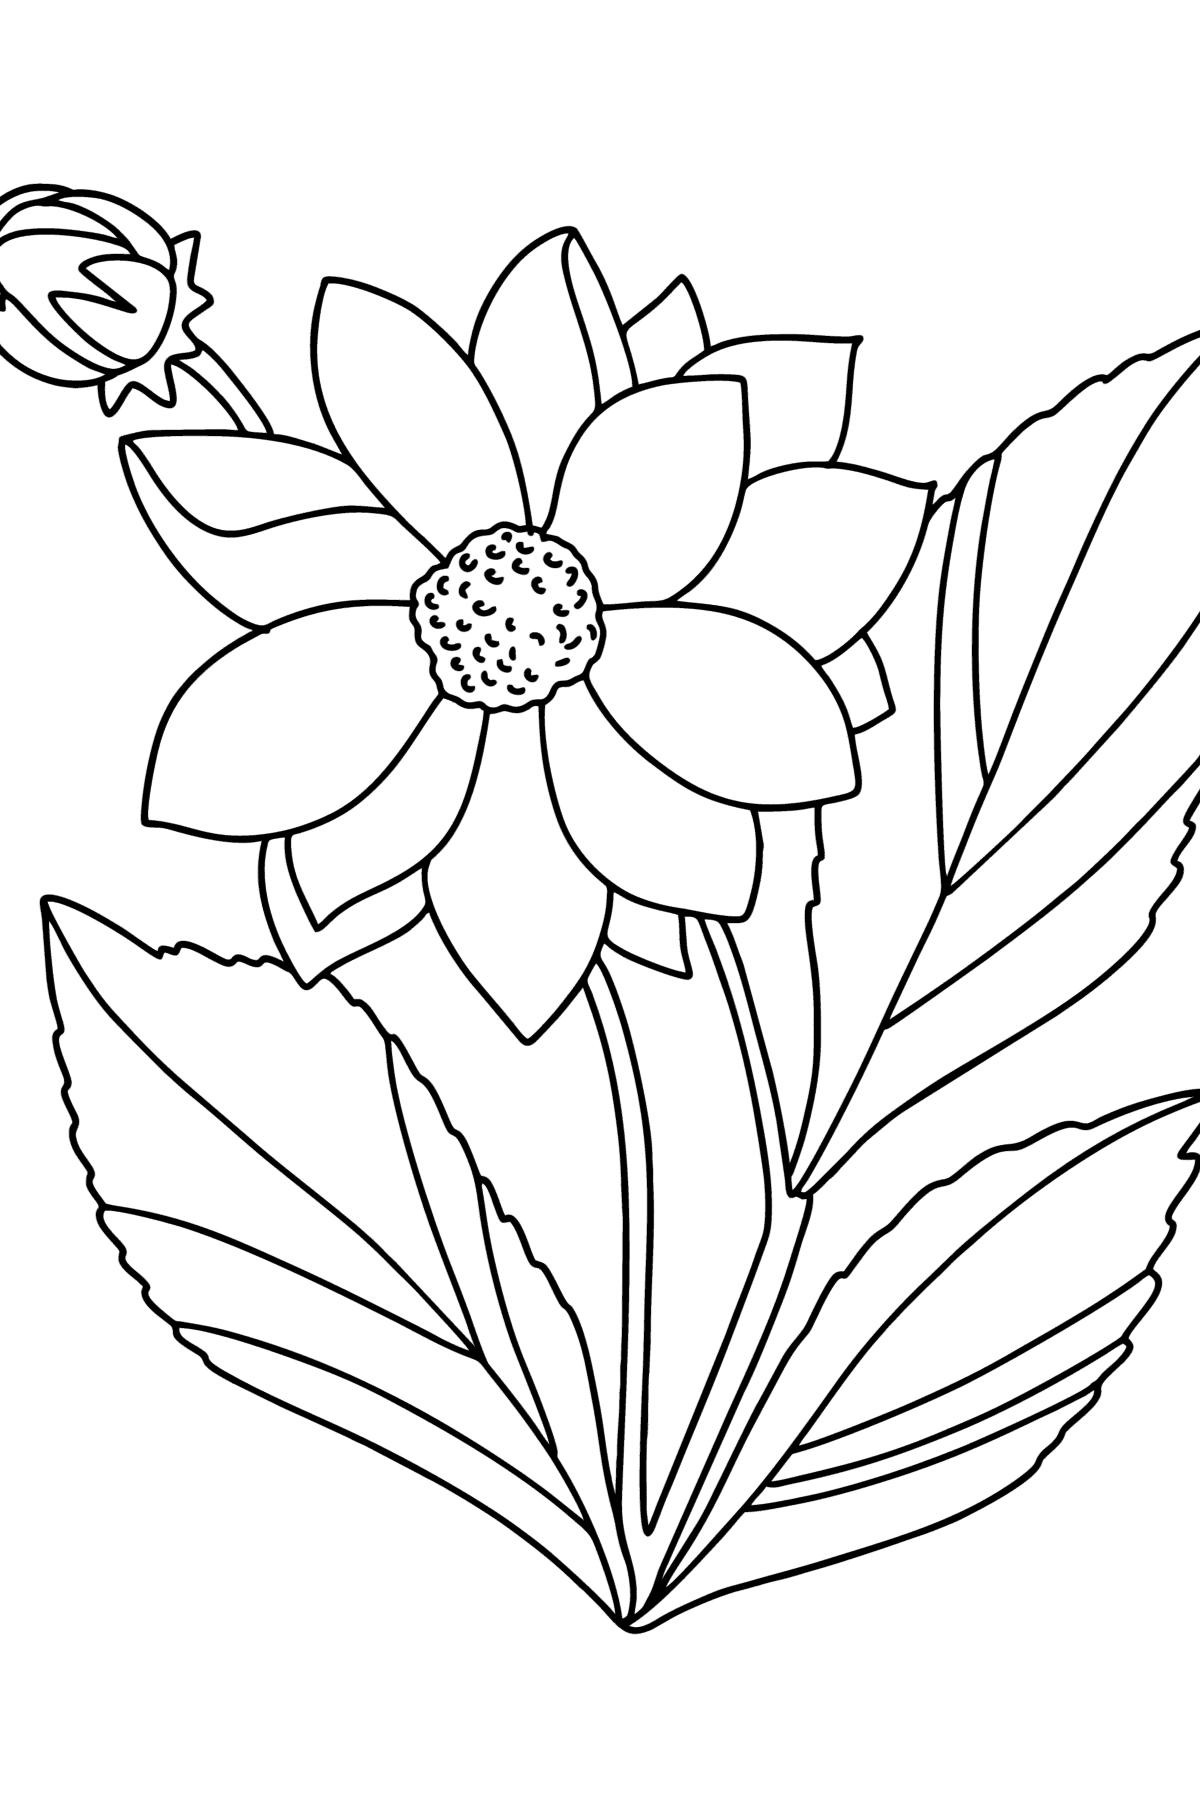 Flowers Coloring Pages   Printable for Free, and Color Online